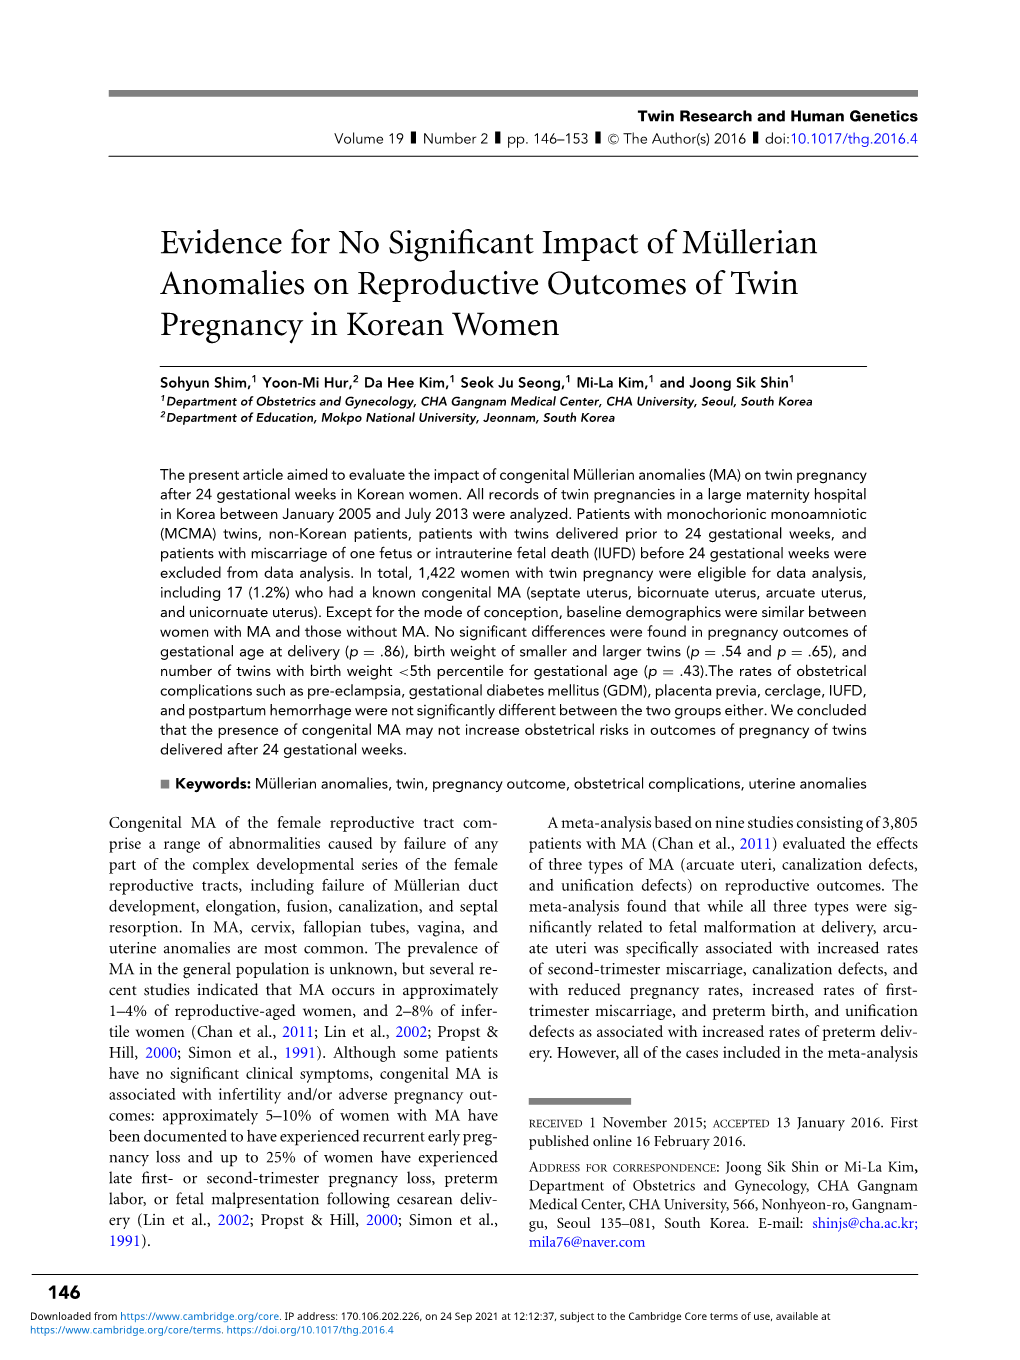 Evidence for No Significant Impact of M¨Ullerian Anomalies On